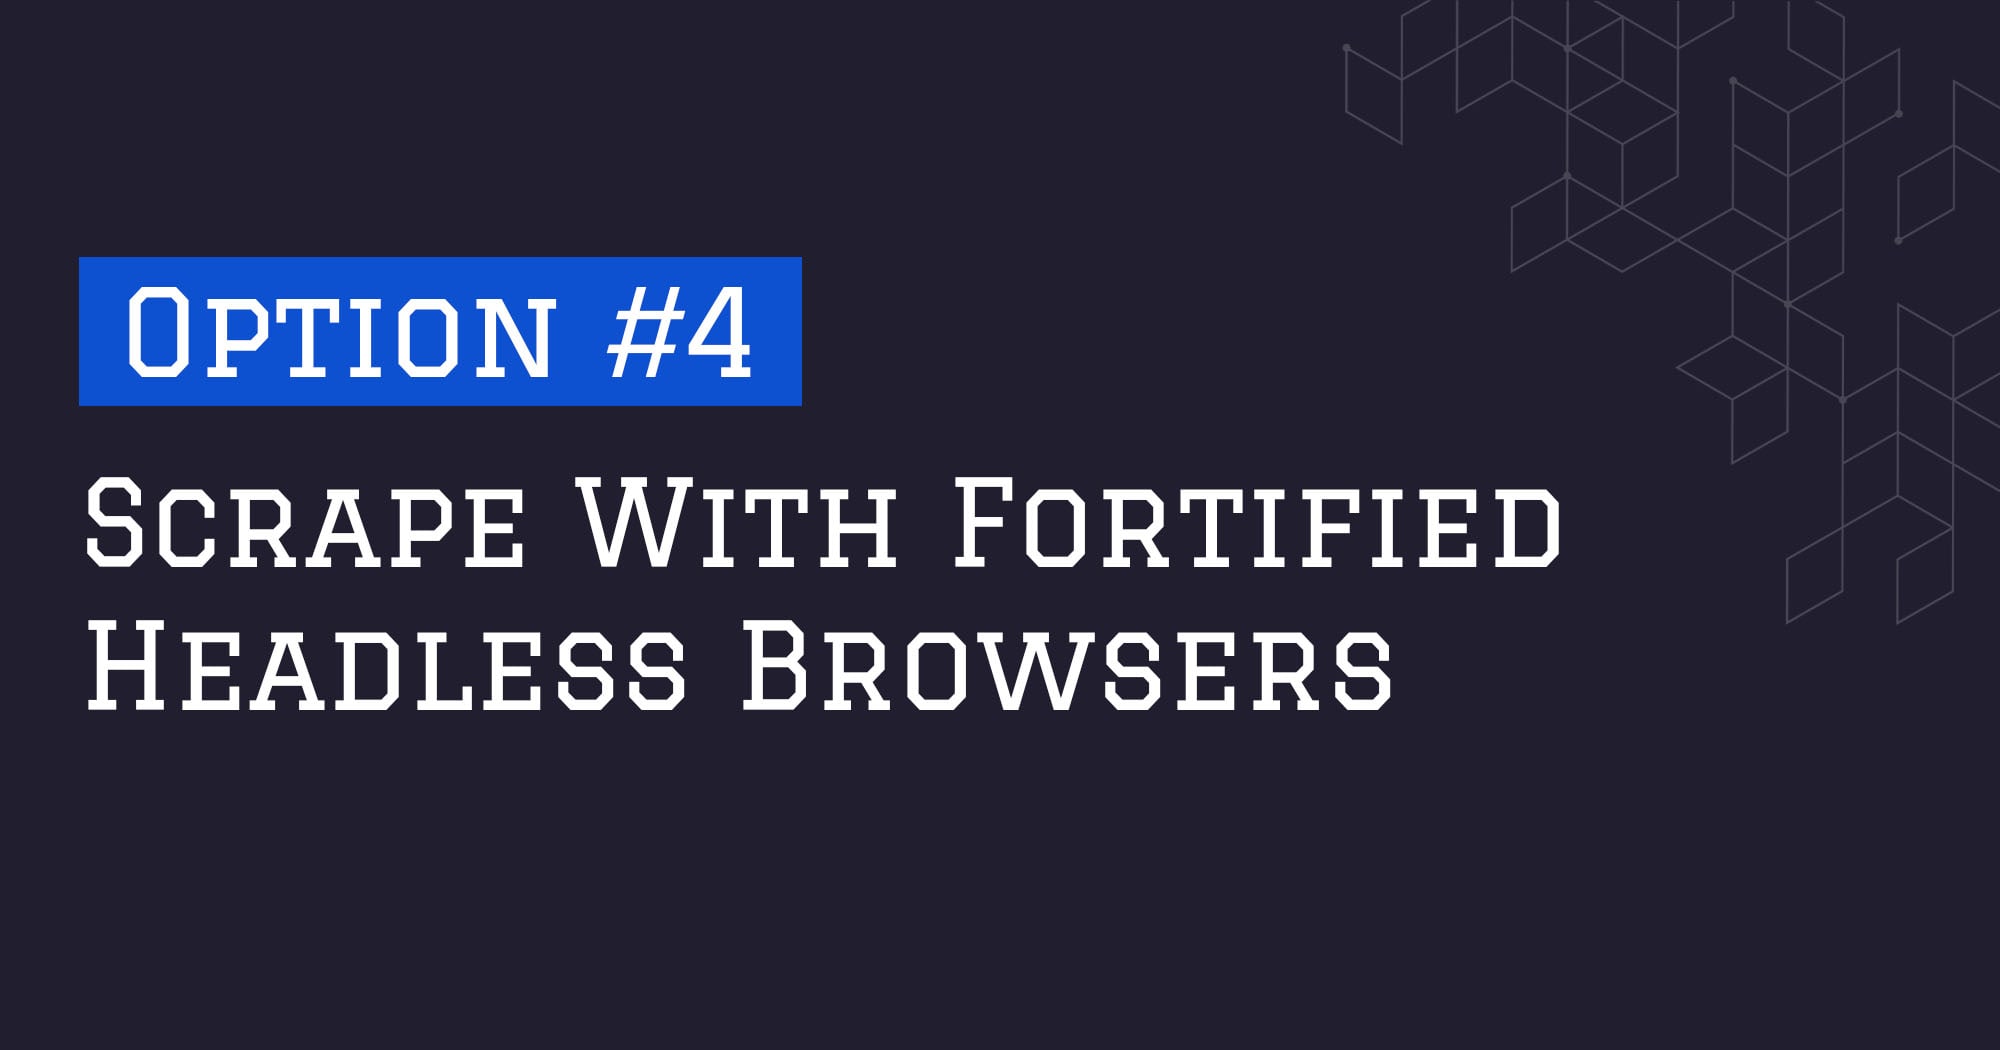 How To Bypass Cloudflare - Option #4: Scrape With Fortified Headless Browsers